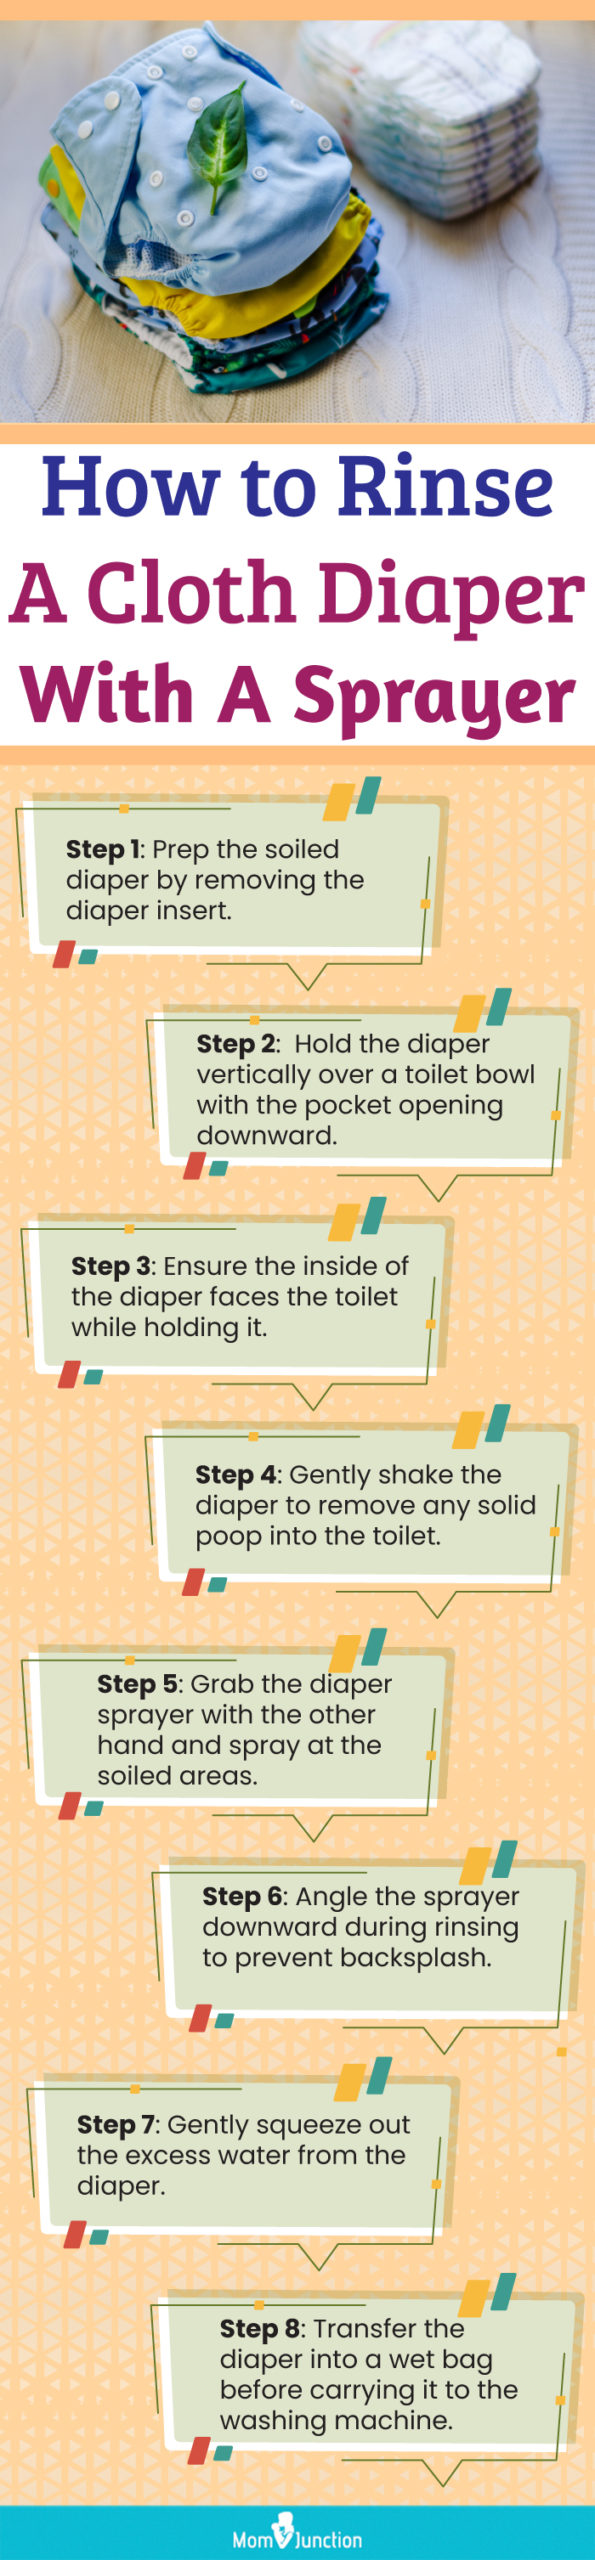 Steps Involved In Rinsing A Diaper With A Sprayer (infographic)